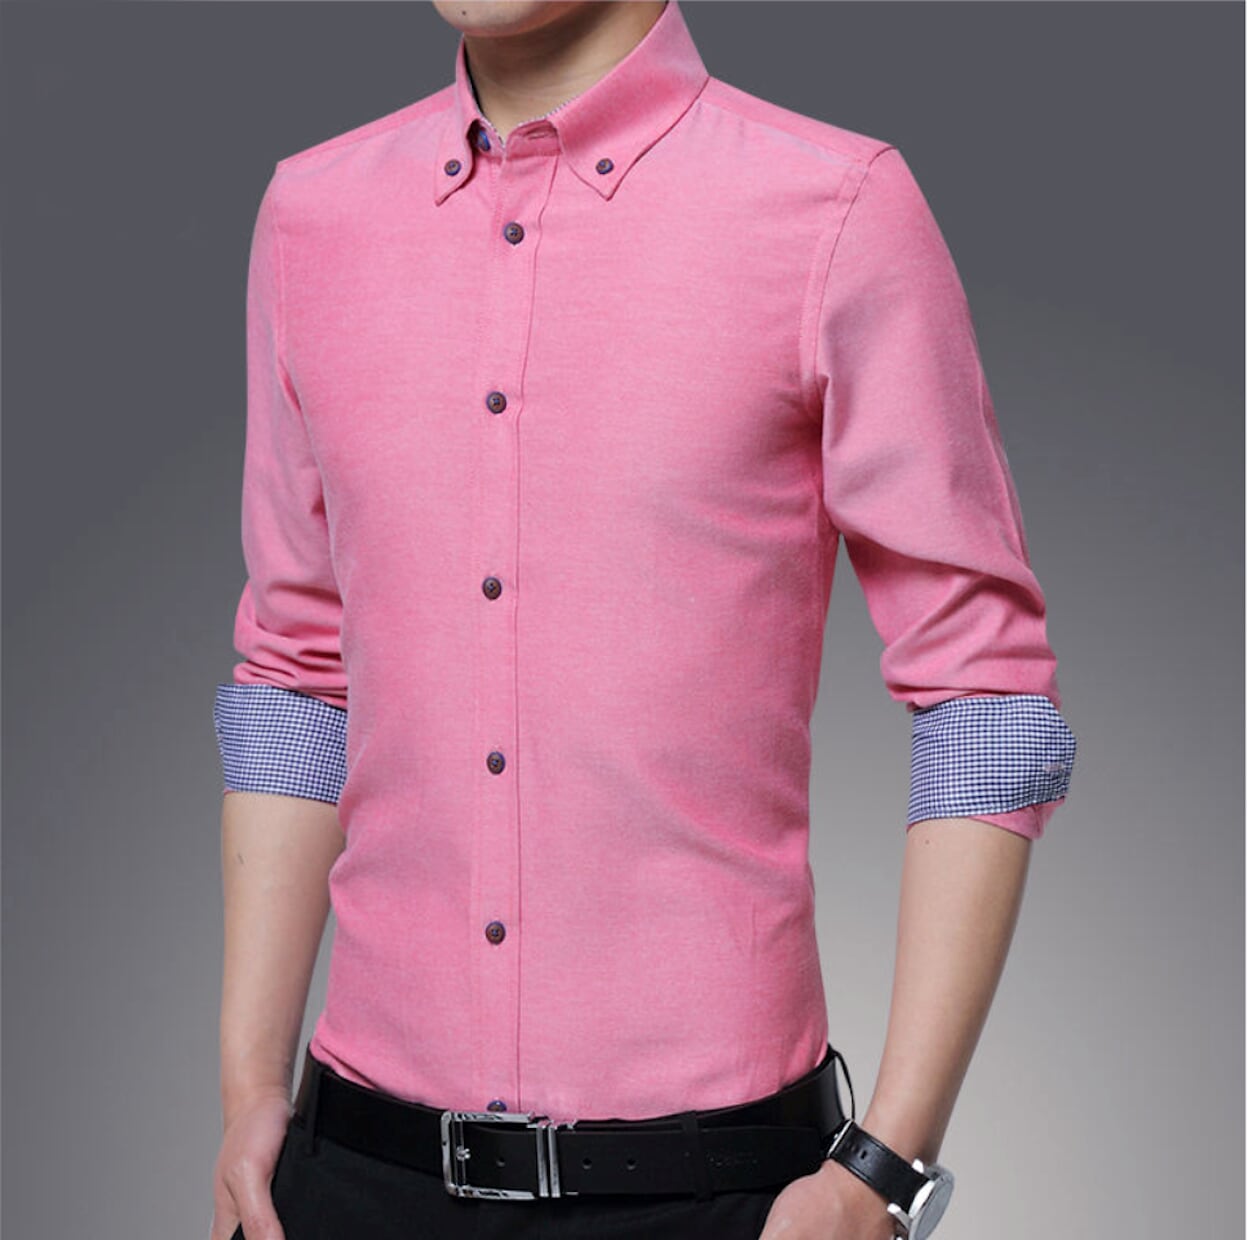 Mens Long Sleeve Shirt with Inner Plaid